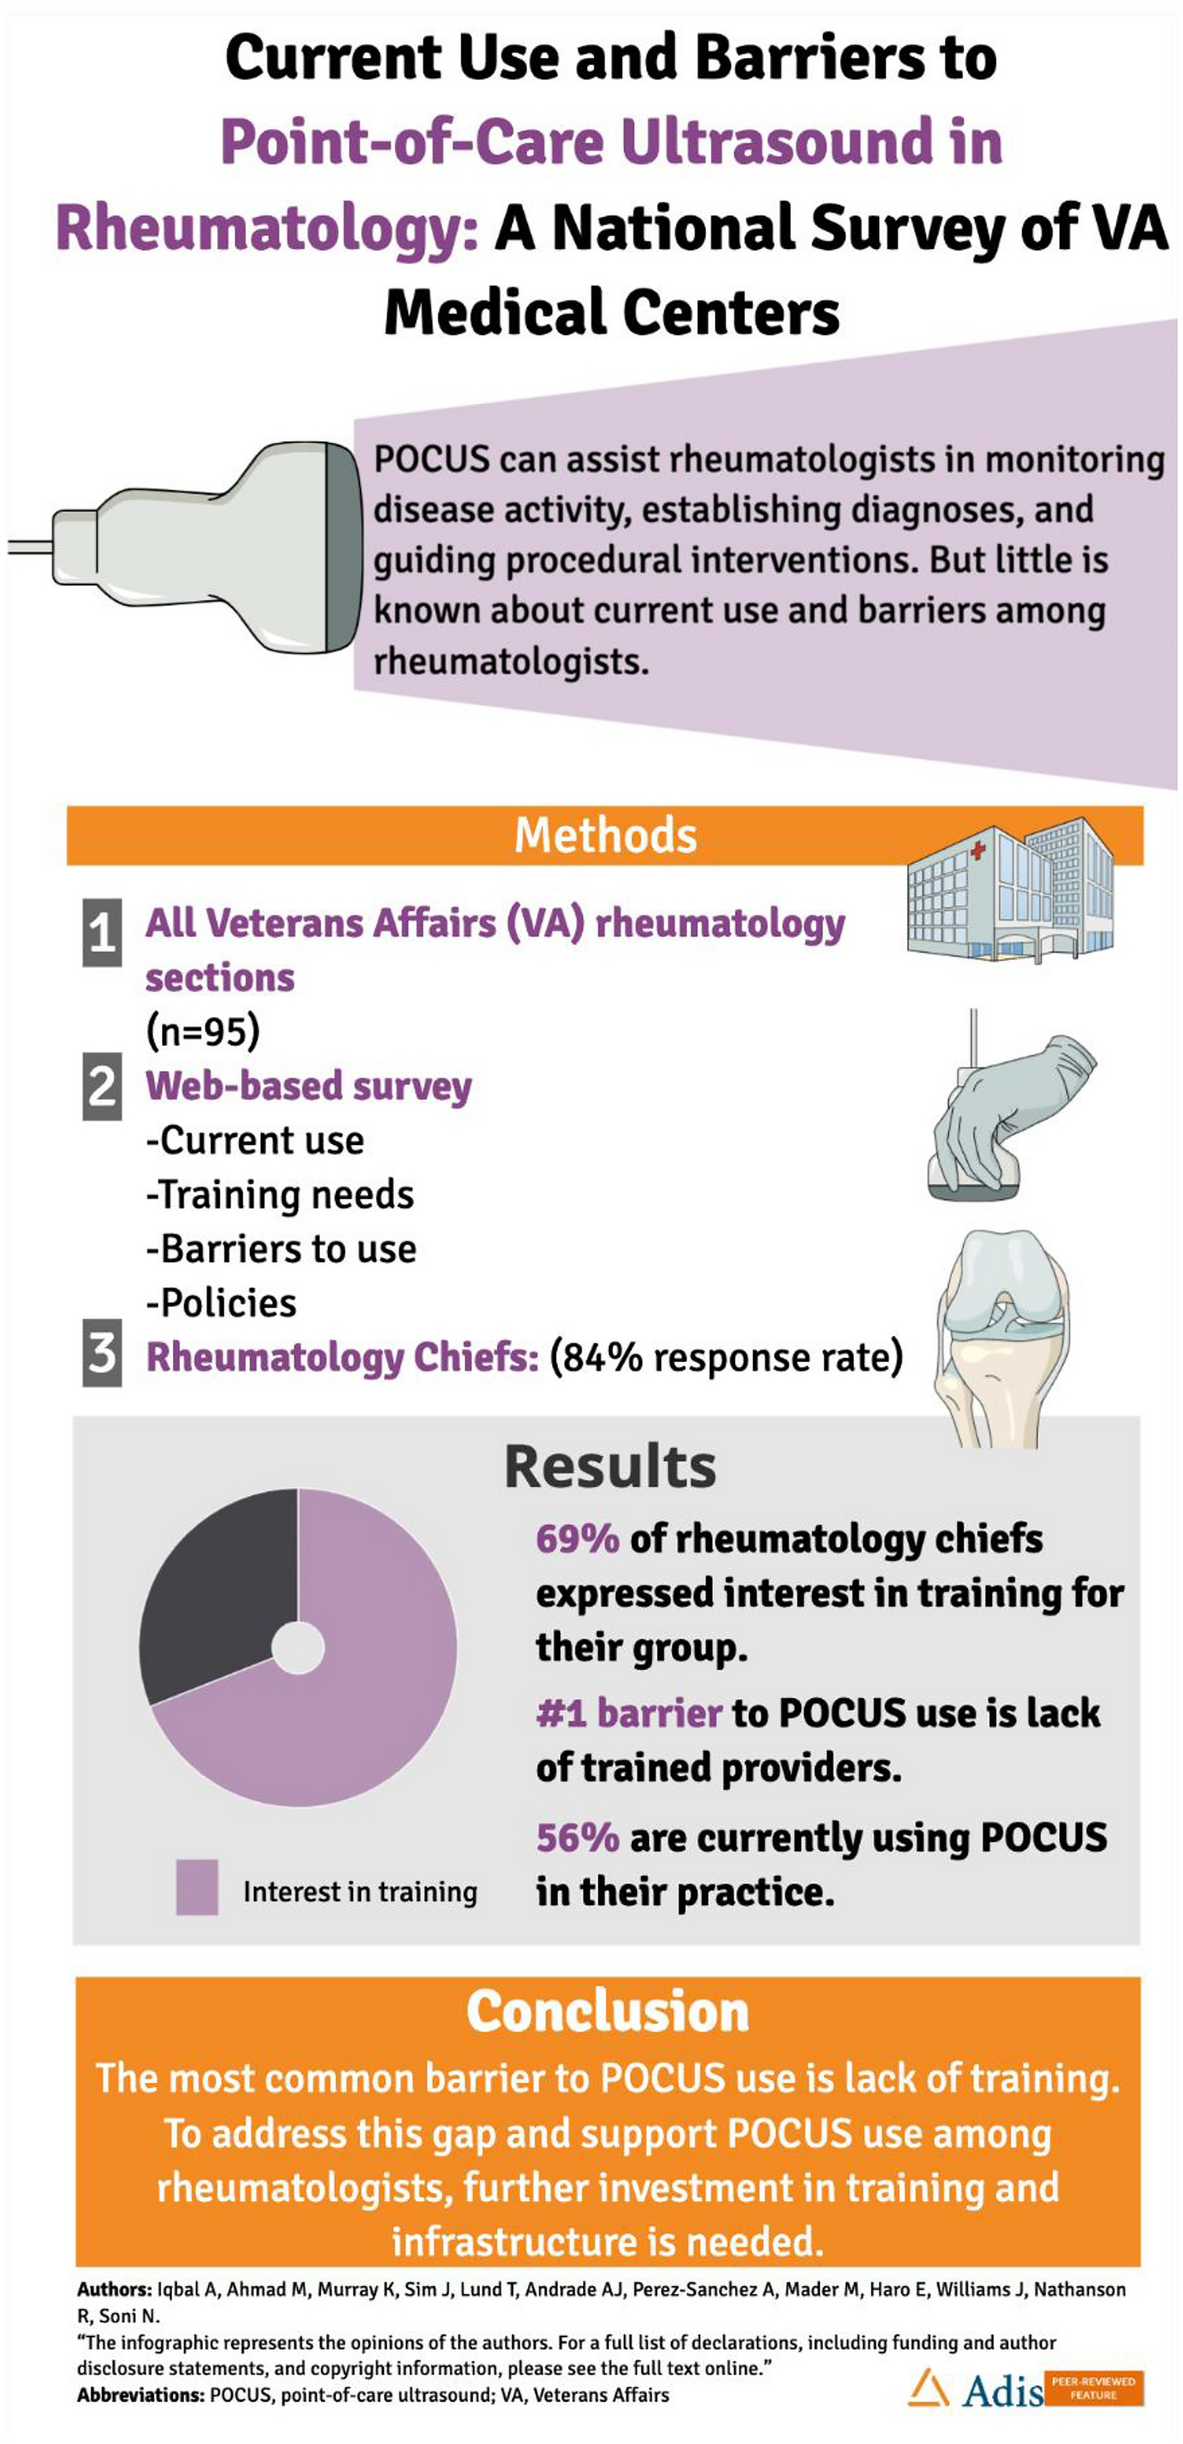 Current Use and Barriers to Point-of-Care Ultrasound in Rheumatology: A National Survey of VA Medical Centers